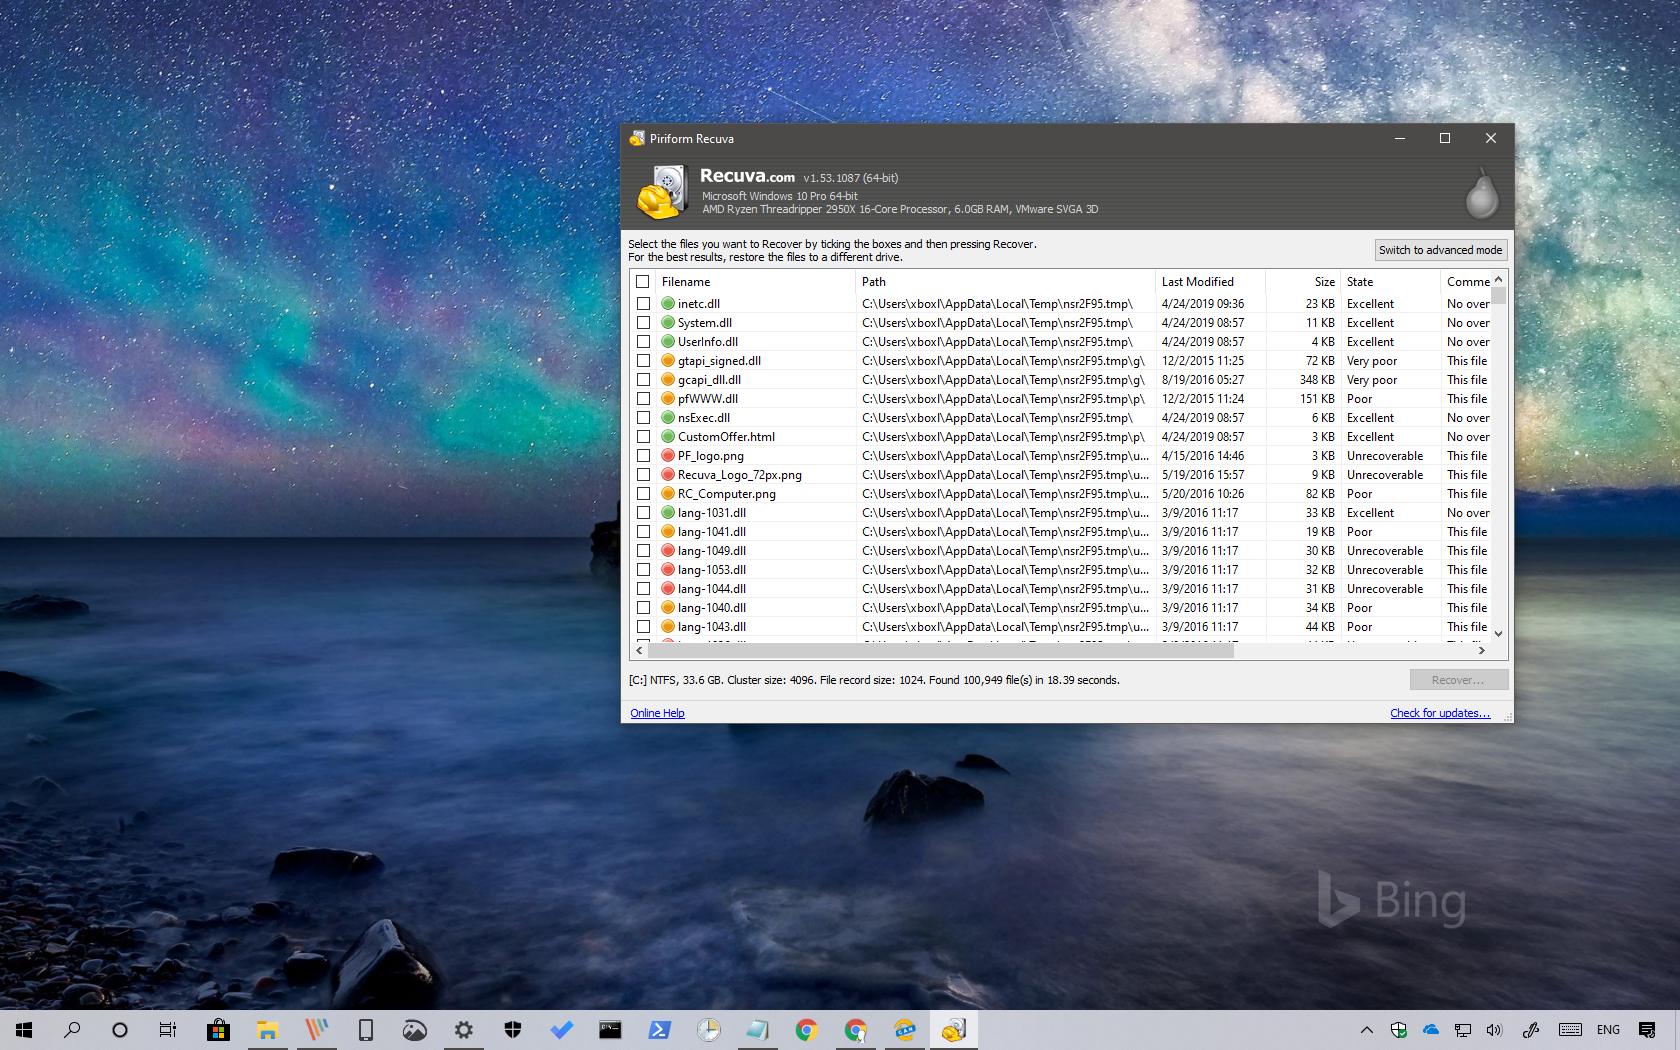 file recovery windows 10